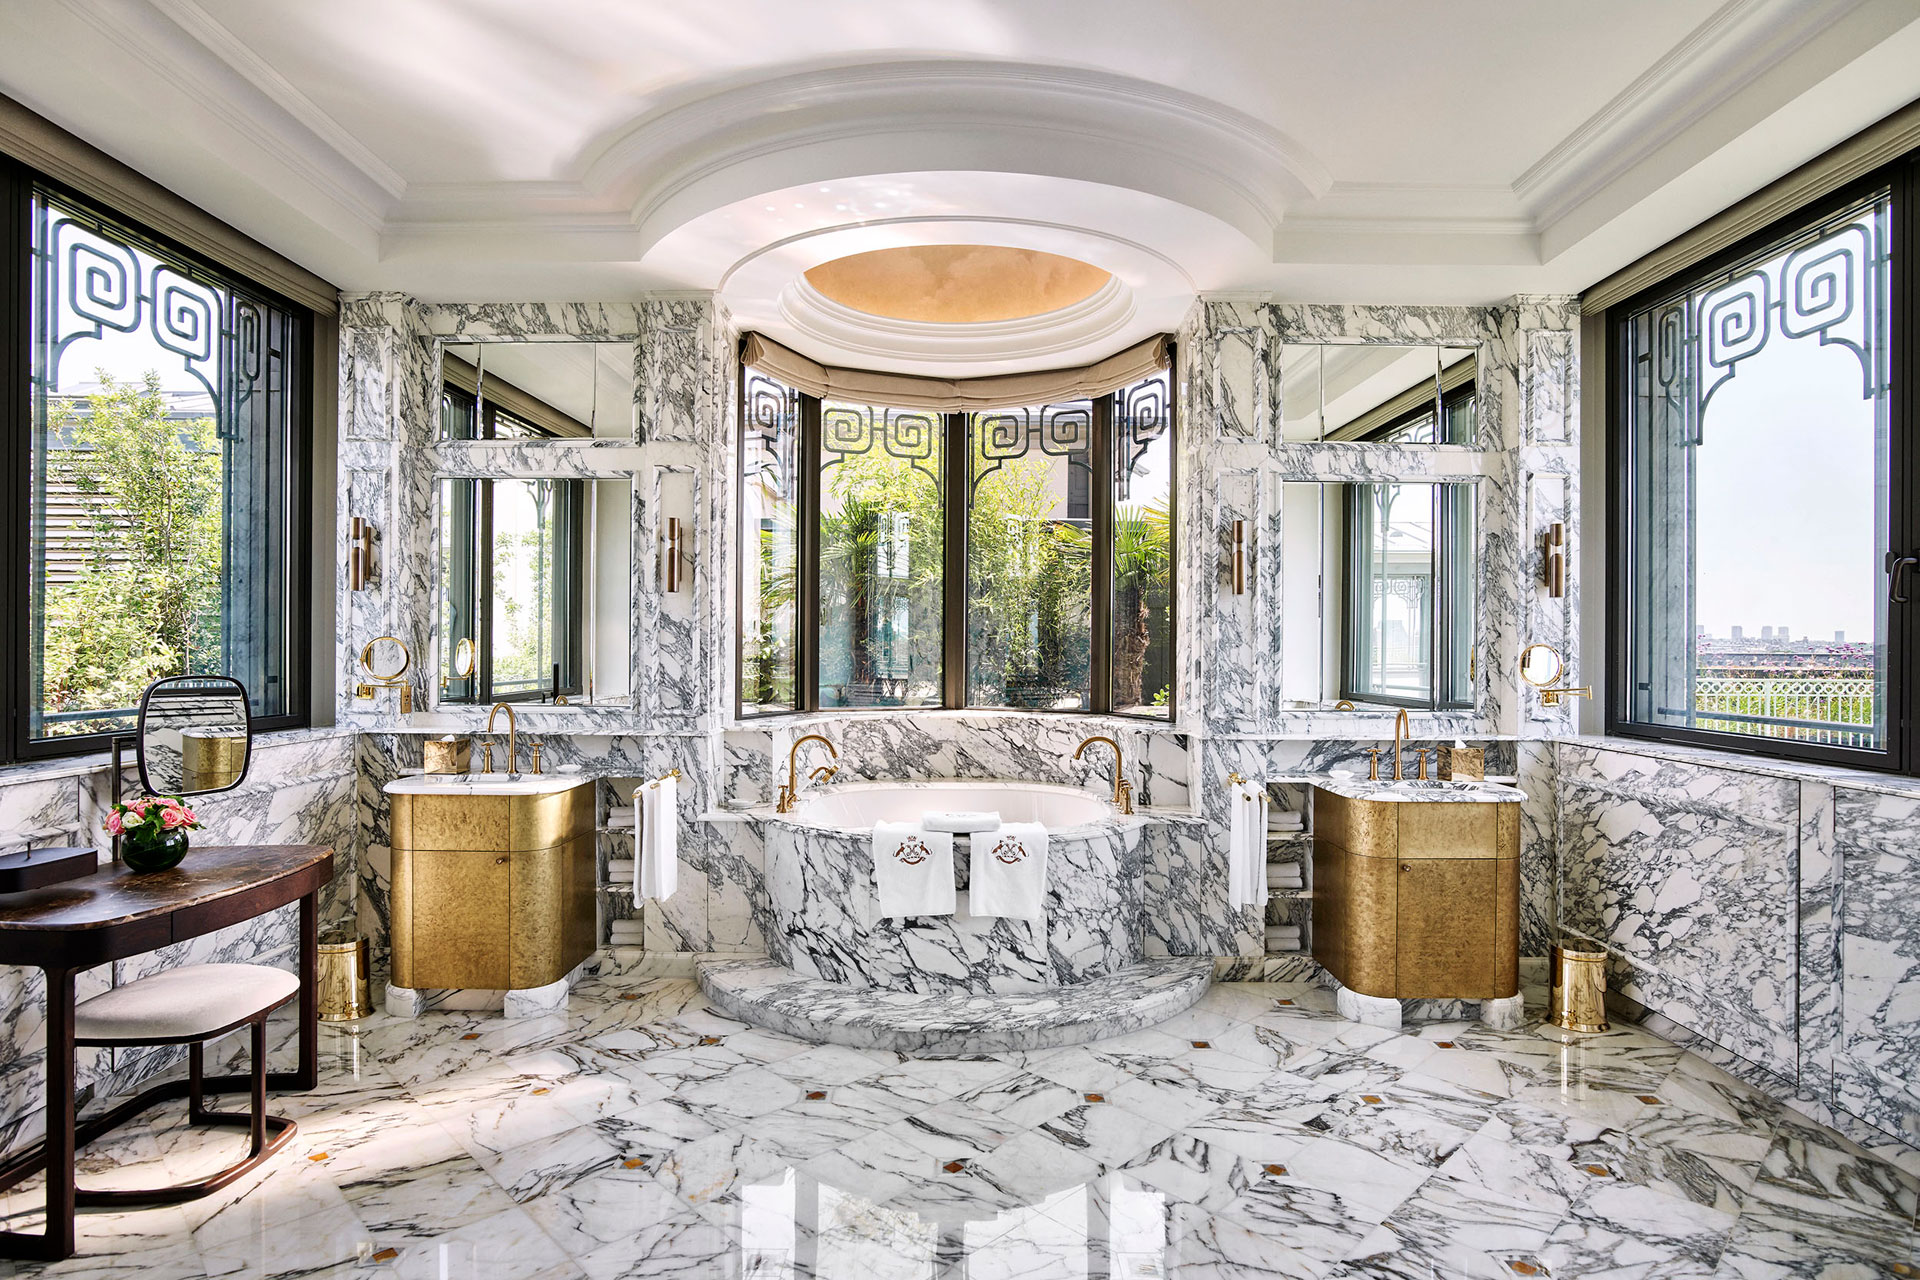 The Most Beautiful Hotel Bathrooms